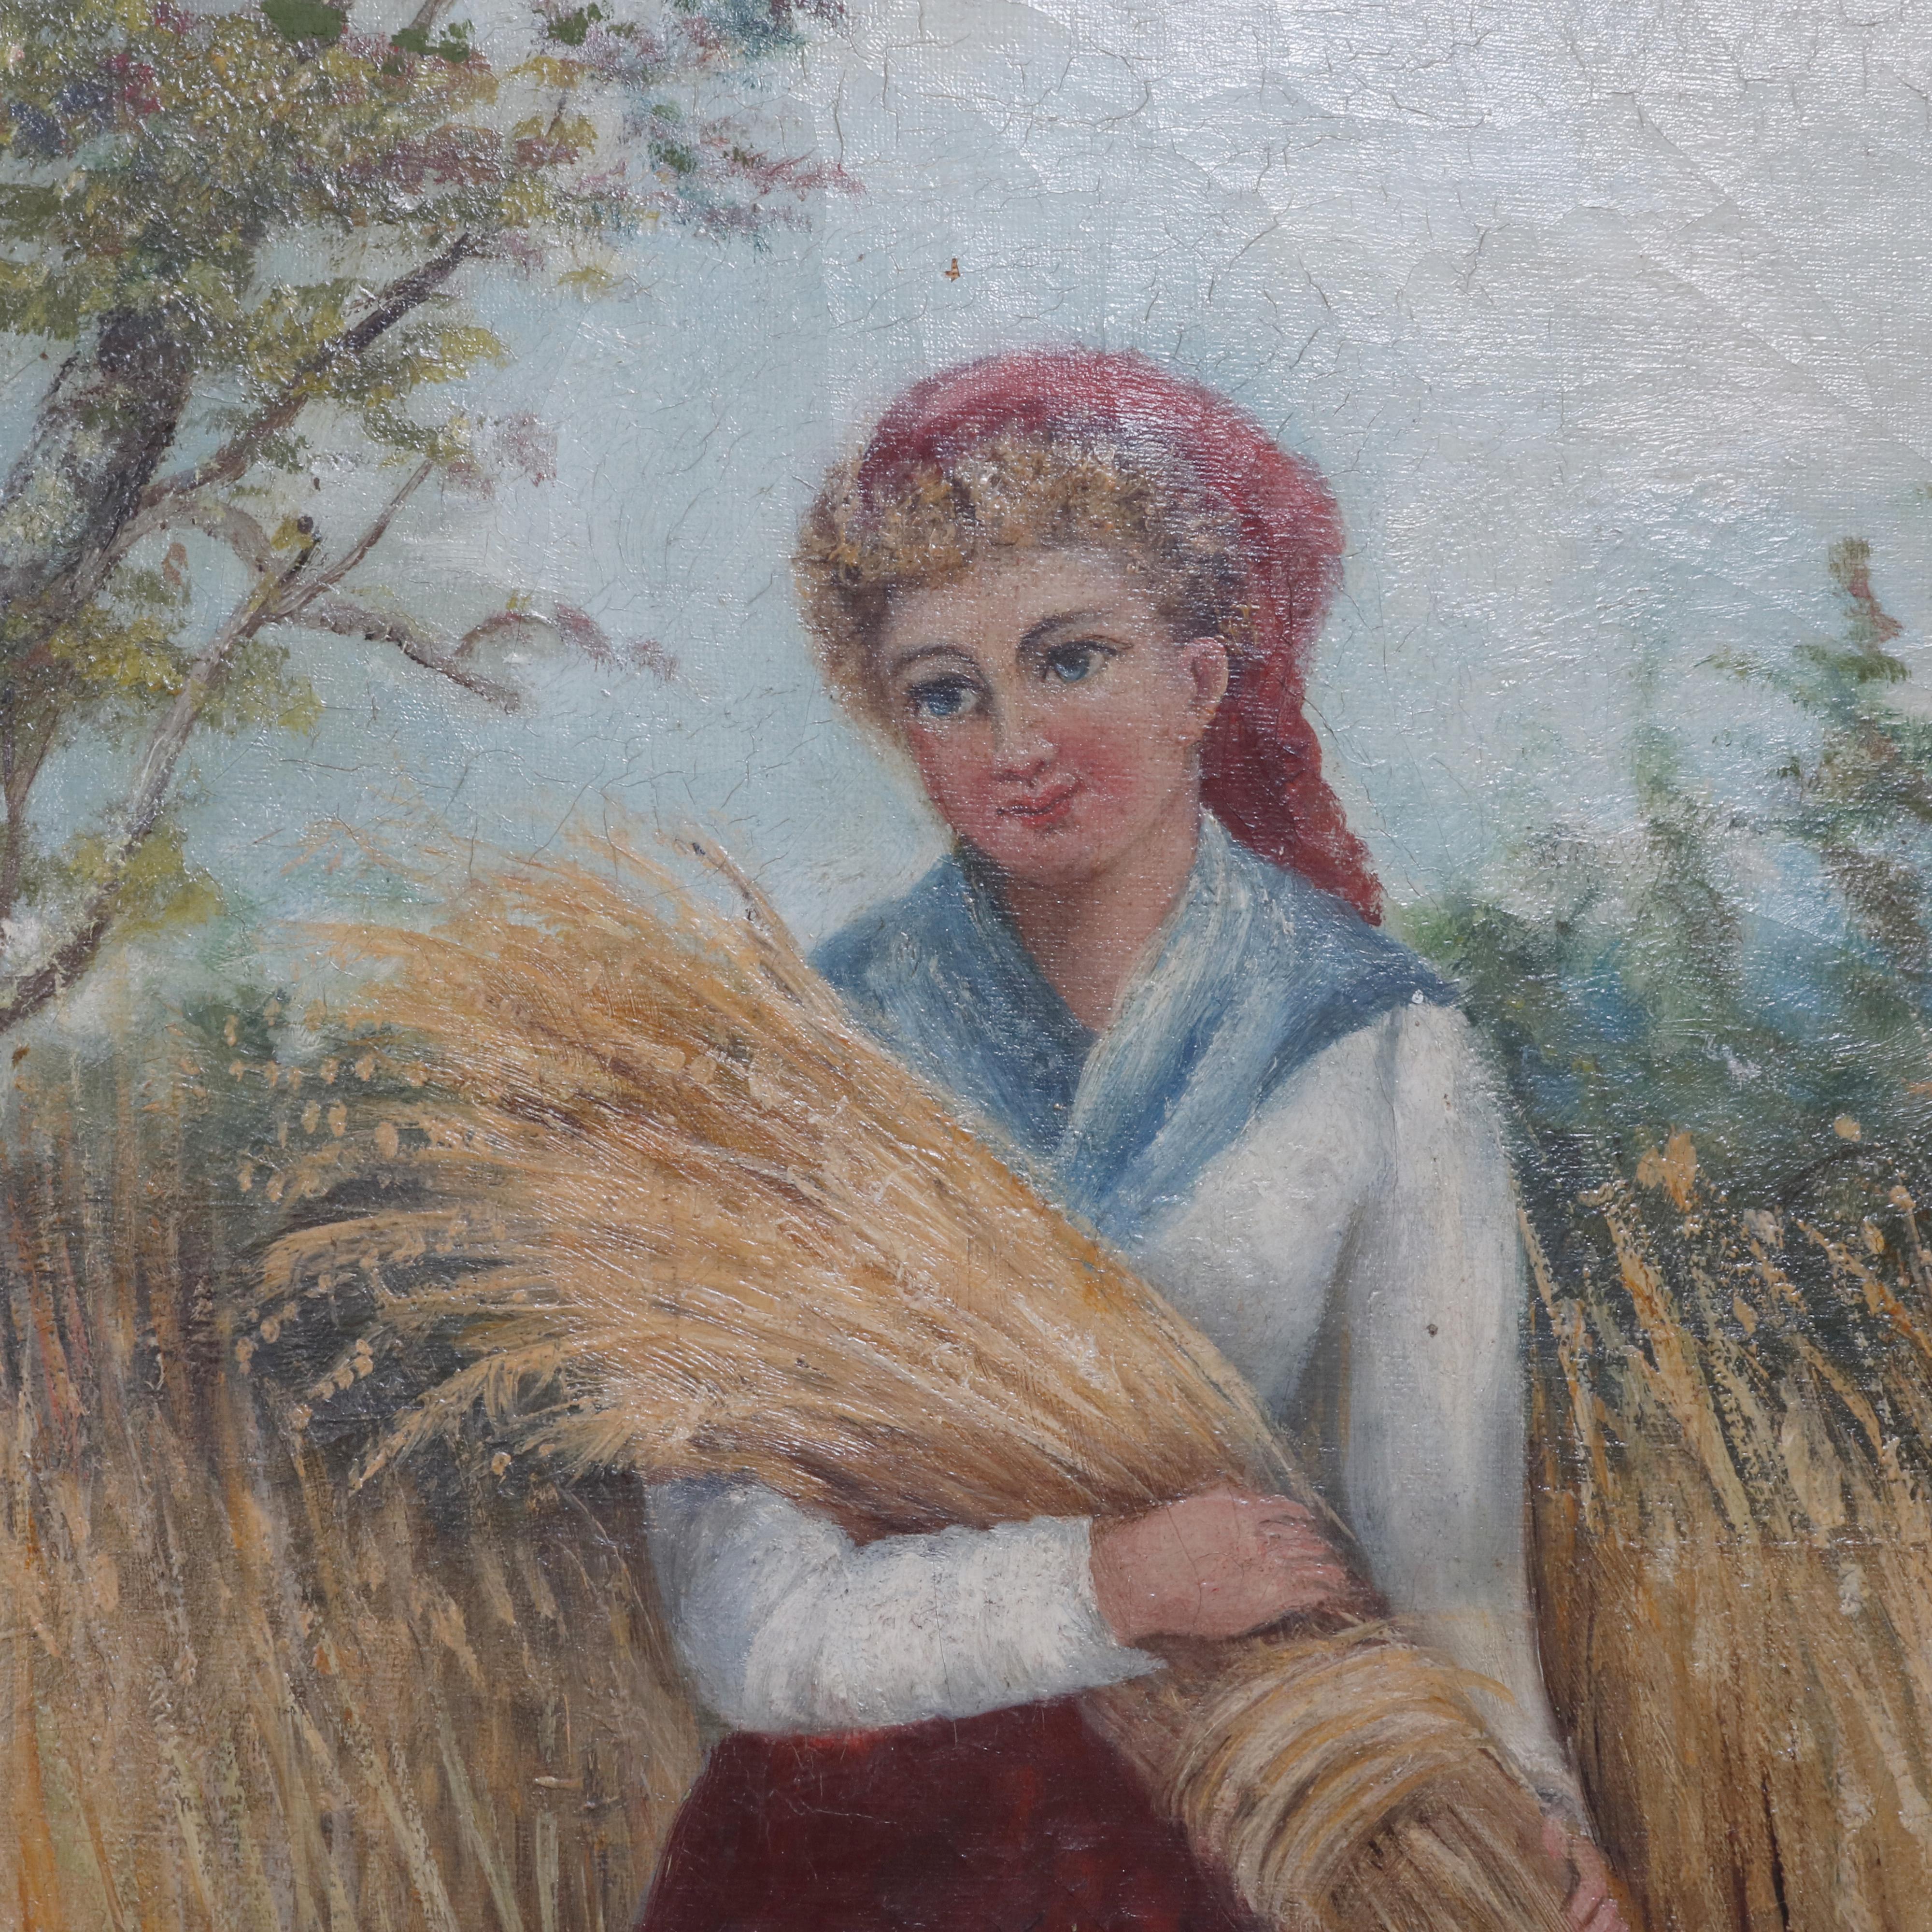 An antique painting, continental oil on canvas depicts barefoot young woman in countryside setting carrying her wheat harvest, seated in giltwood frame, circa 1890

Measures: 29.25